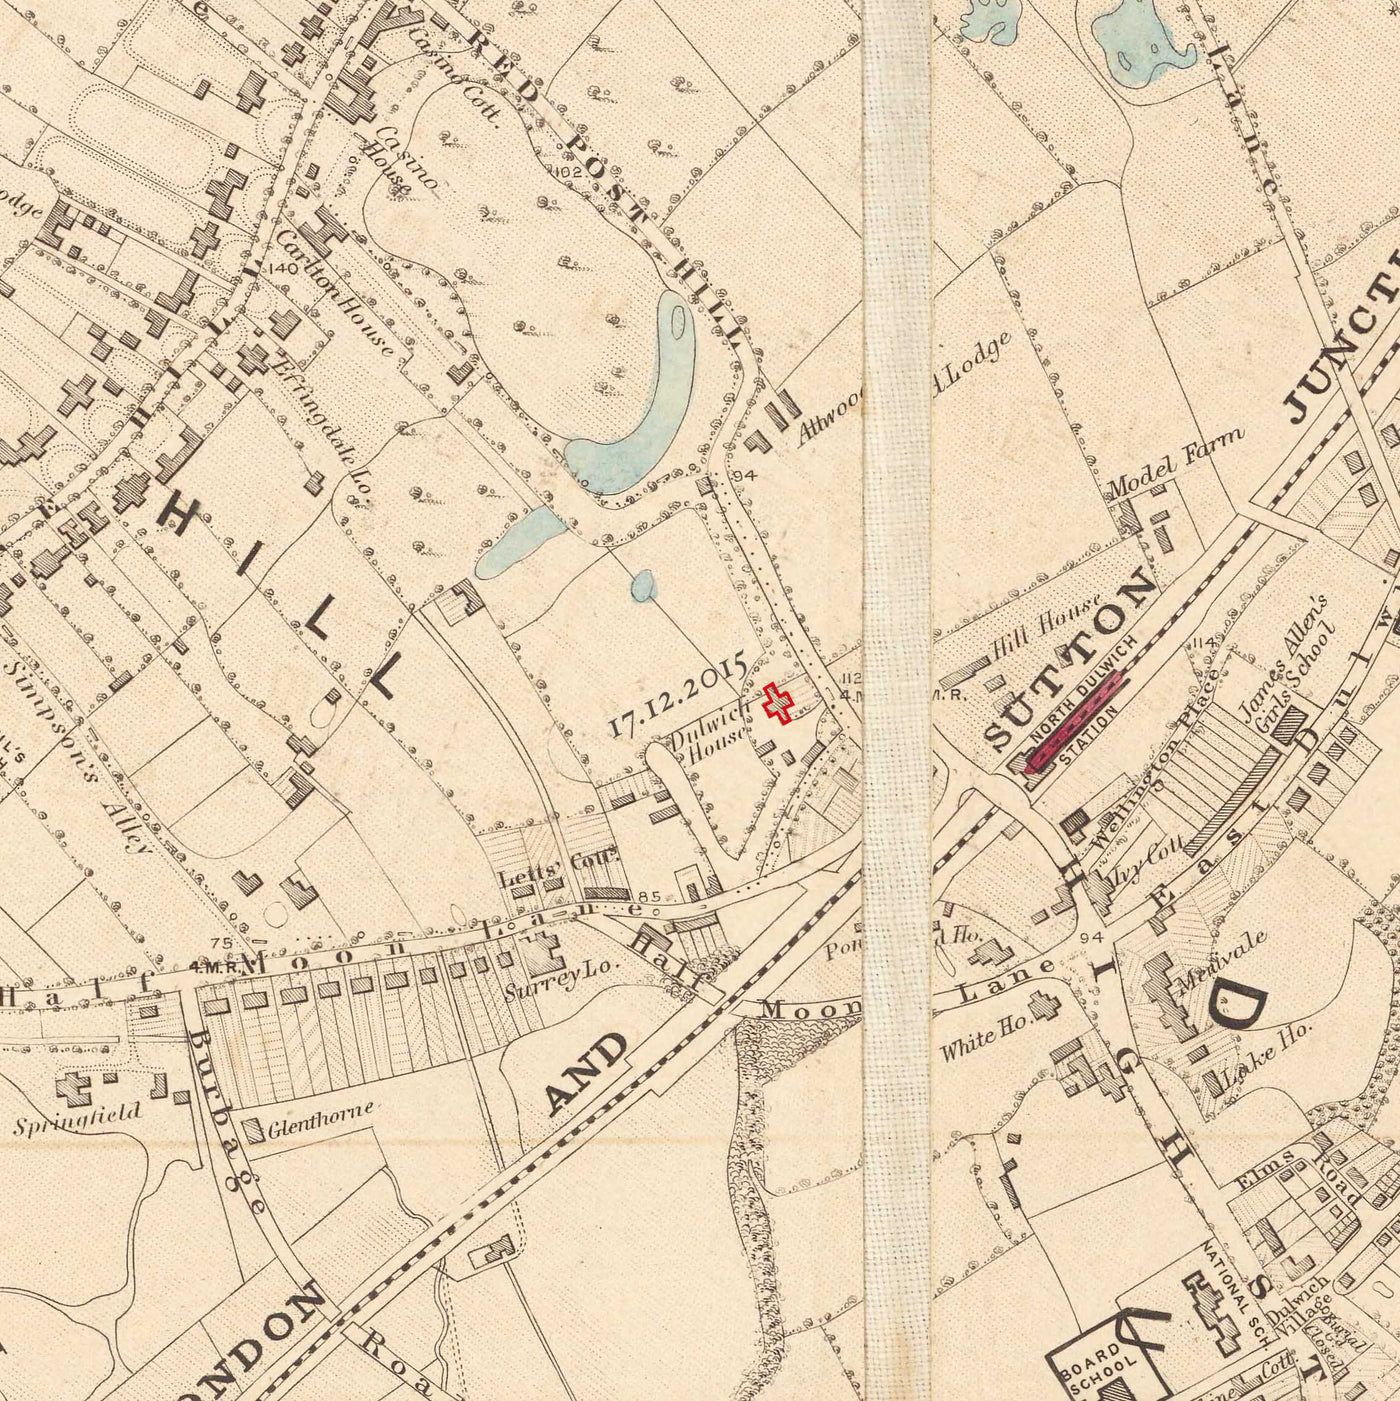 Old Colour Map of North London, 1891 - Finsbury Park, Hackney Downs, Stoke Newington, Clapton - N4, N5, N15, N16, E5